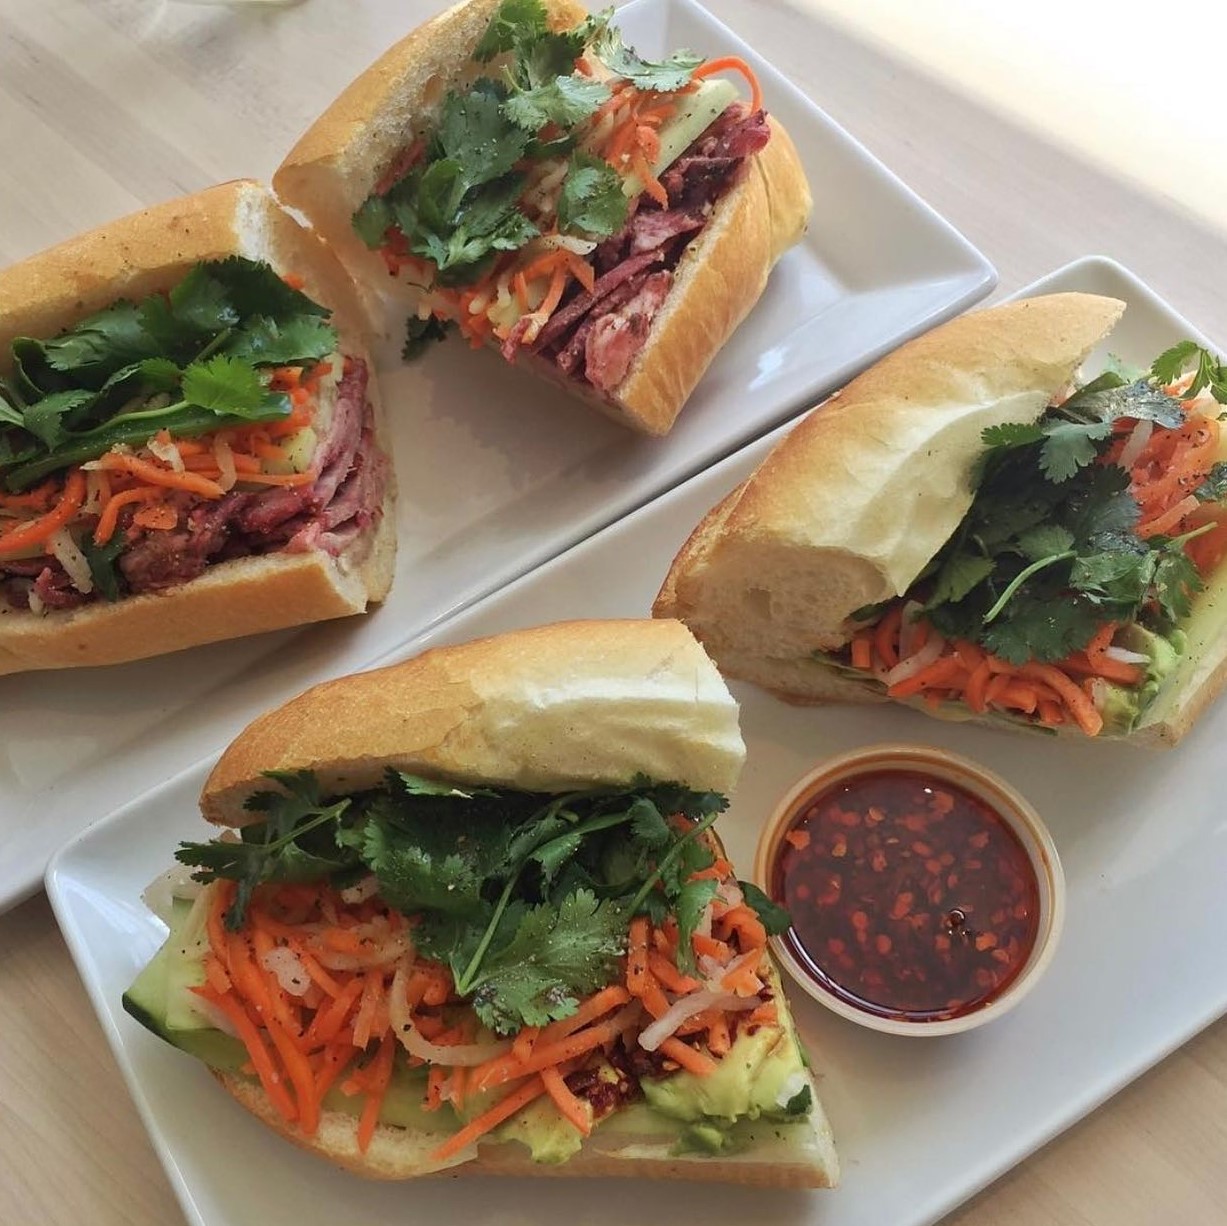 Banh mi sandwiches from Vinh Xuong Bakery, a Denver downtown lunch loved among locals.